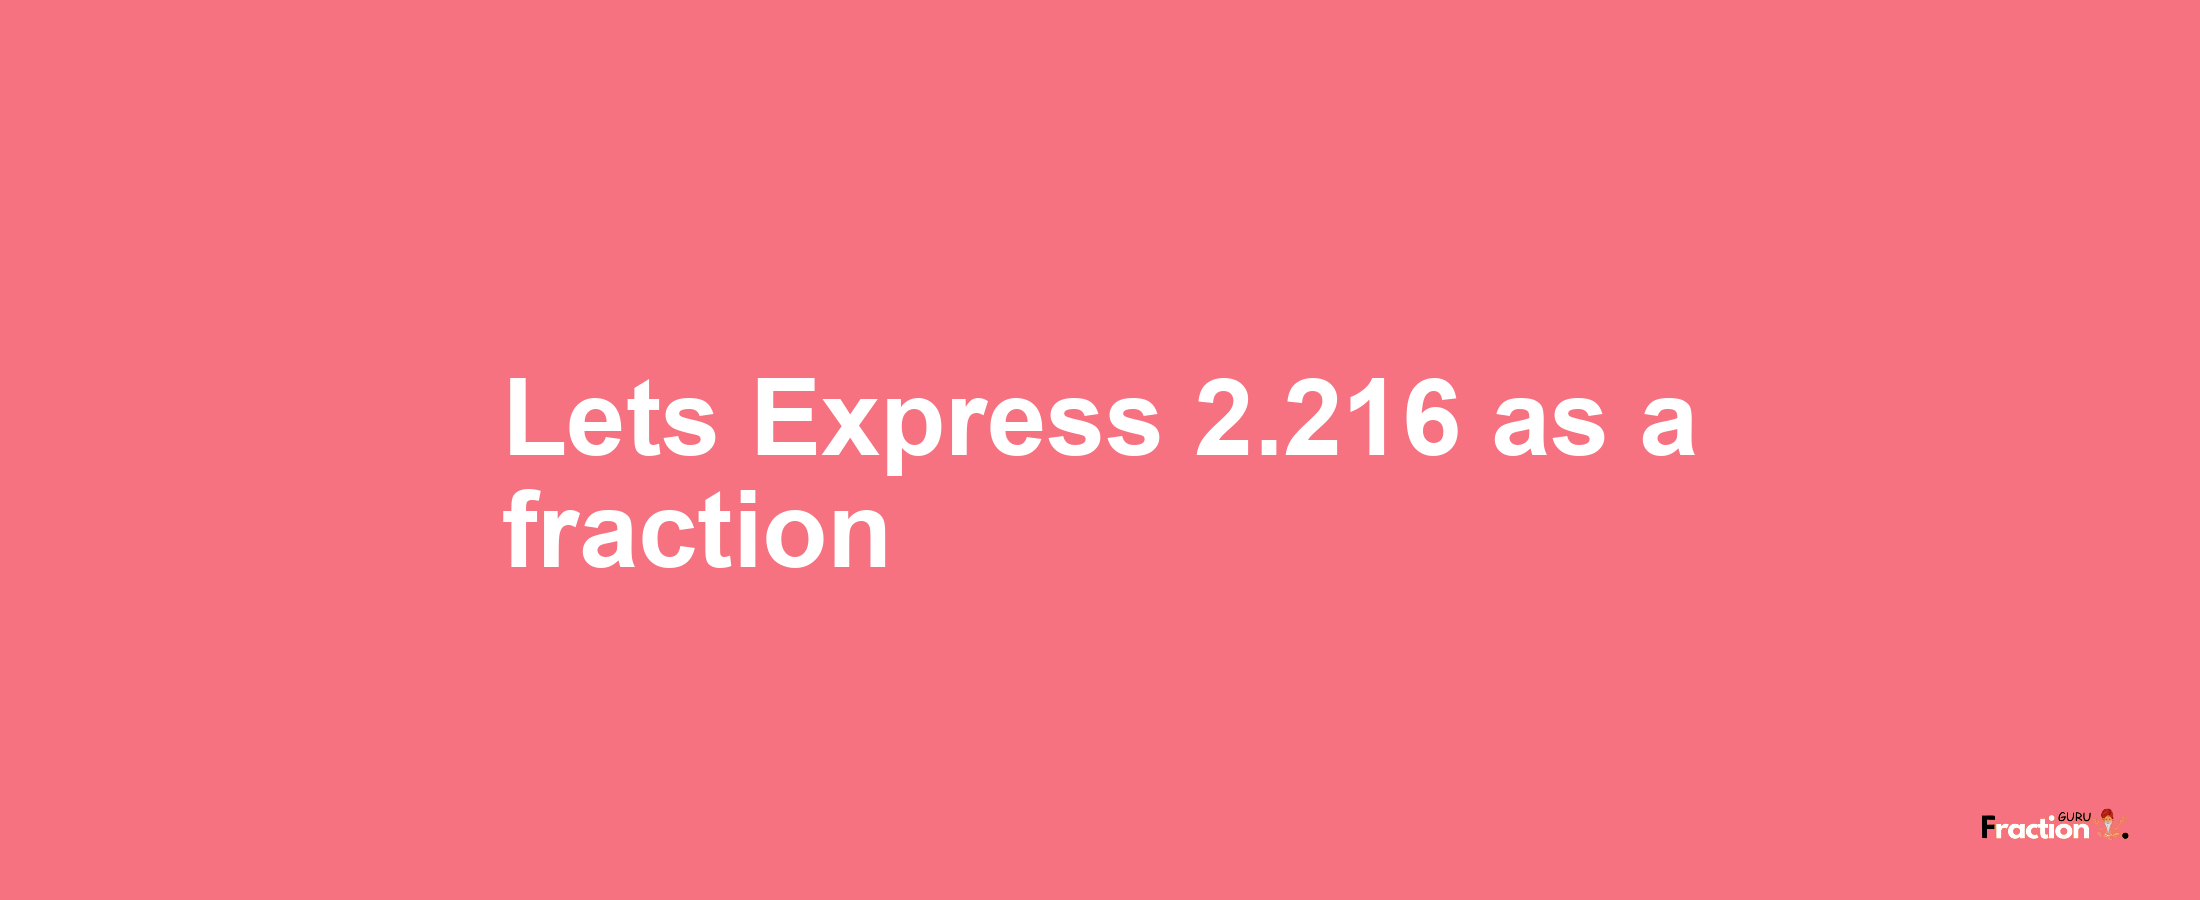 Lets Express 2.216 as afraction